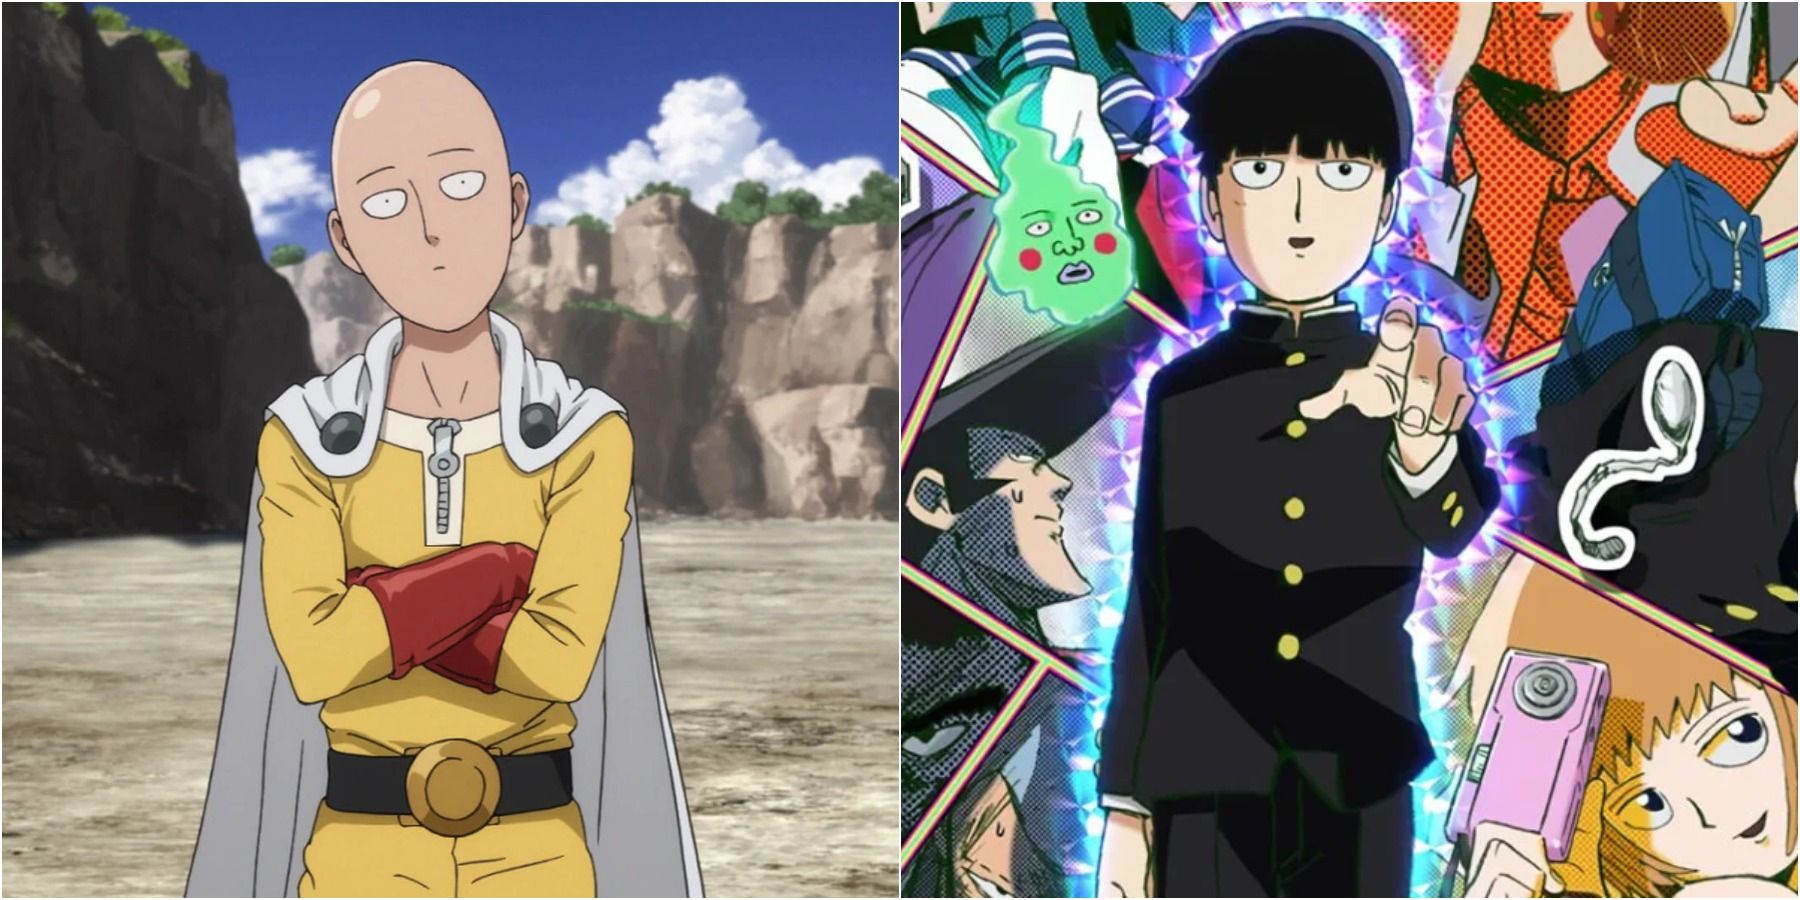 Sibling Rivalry - Why Mob Psycho 100 is Better Than One-Punch Man